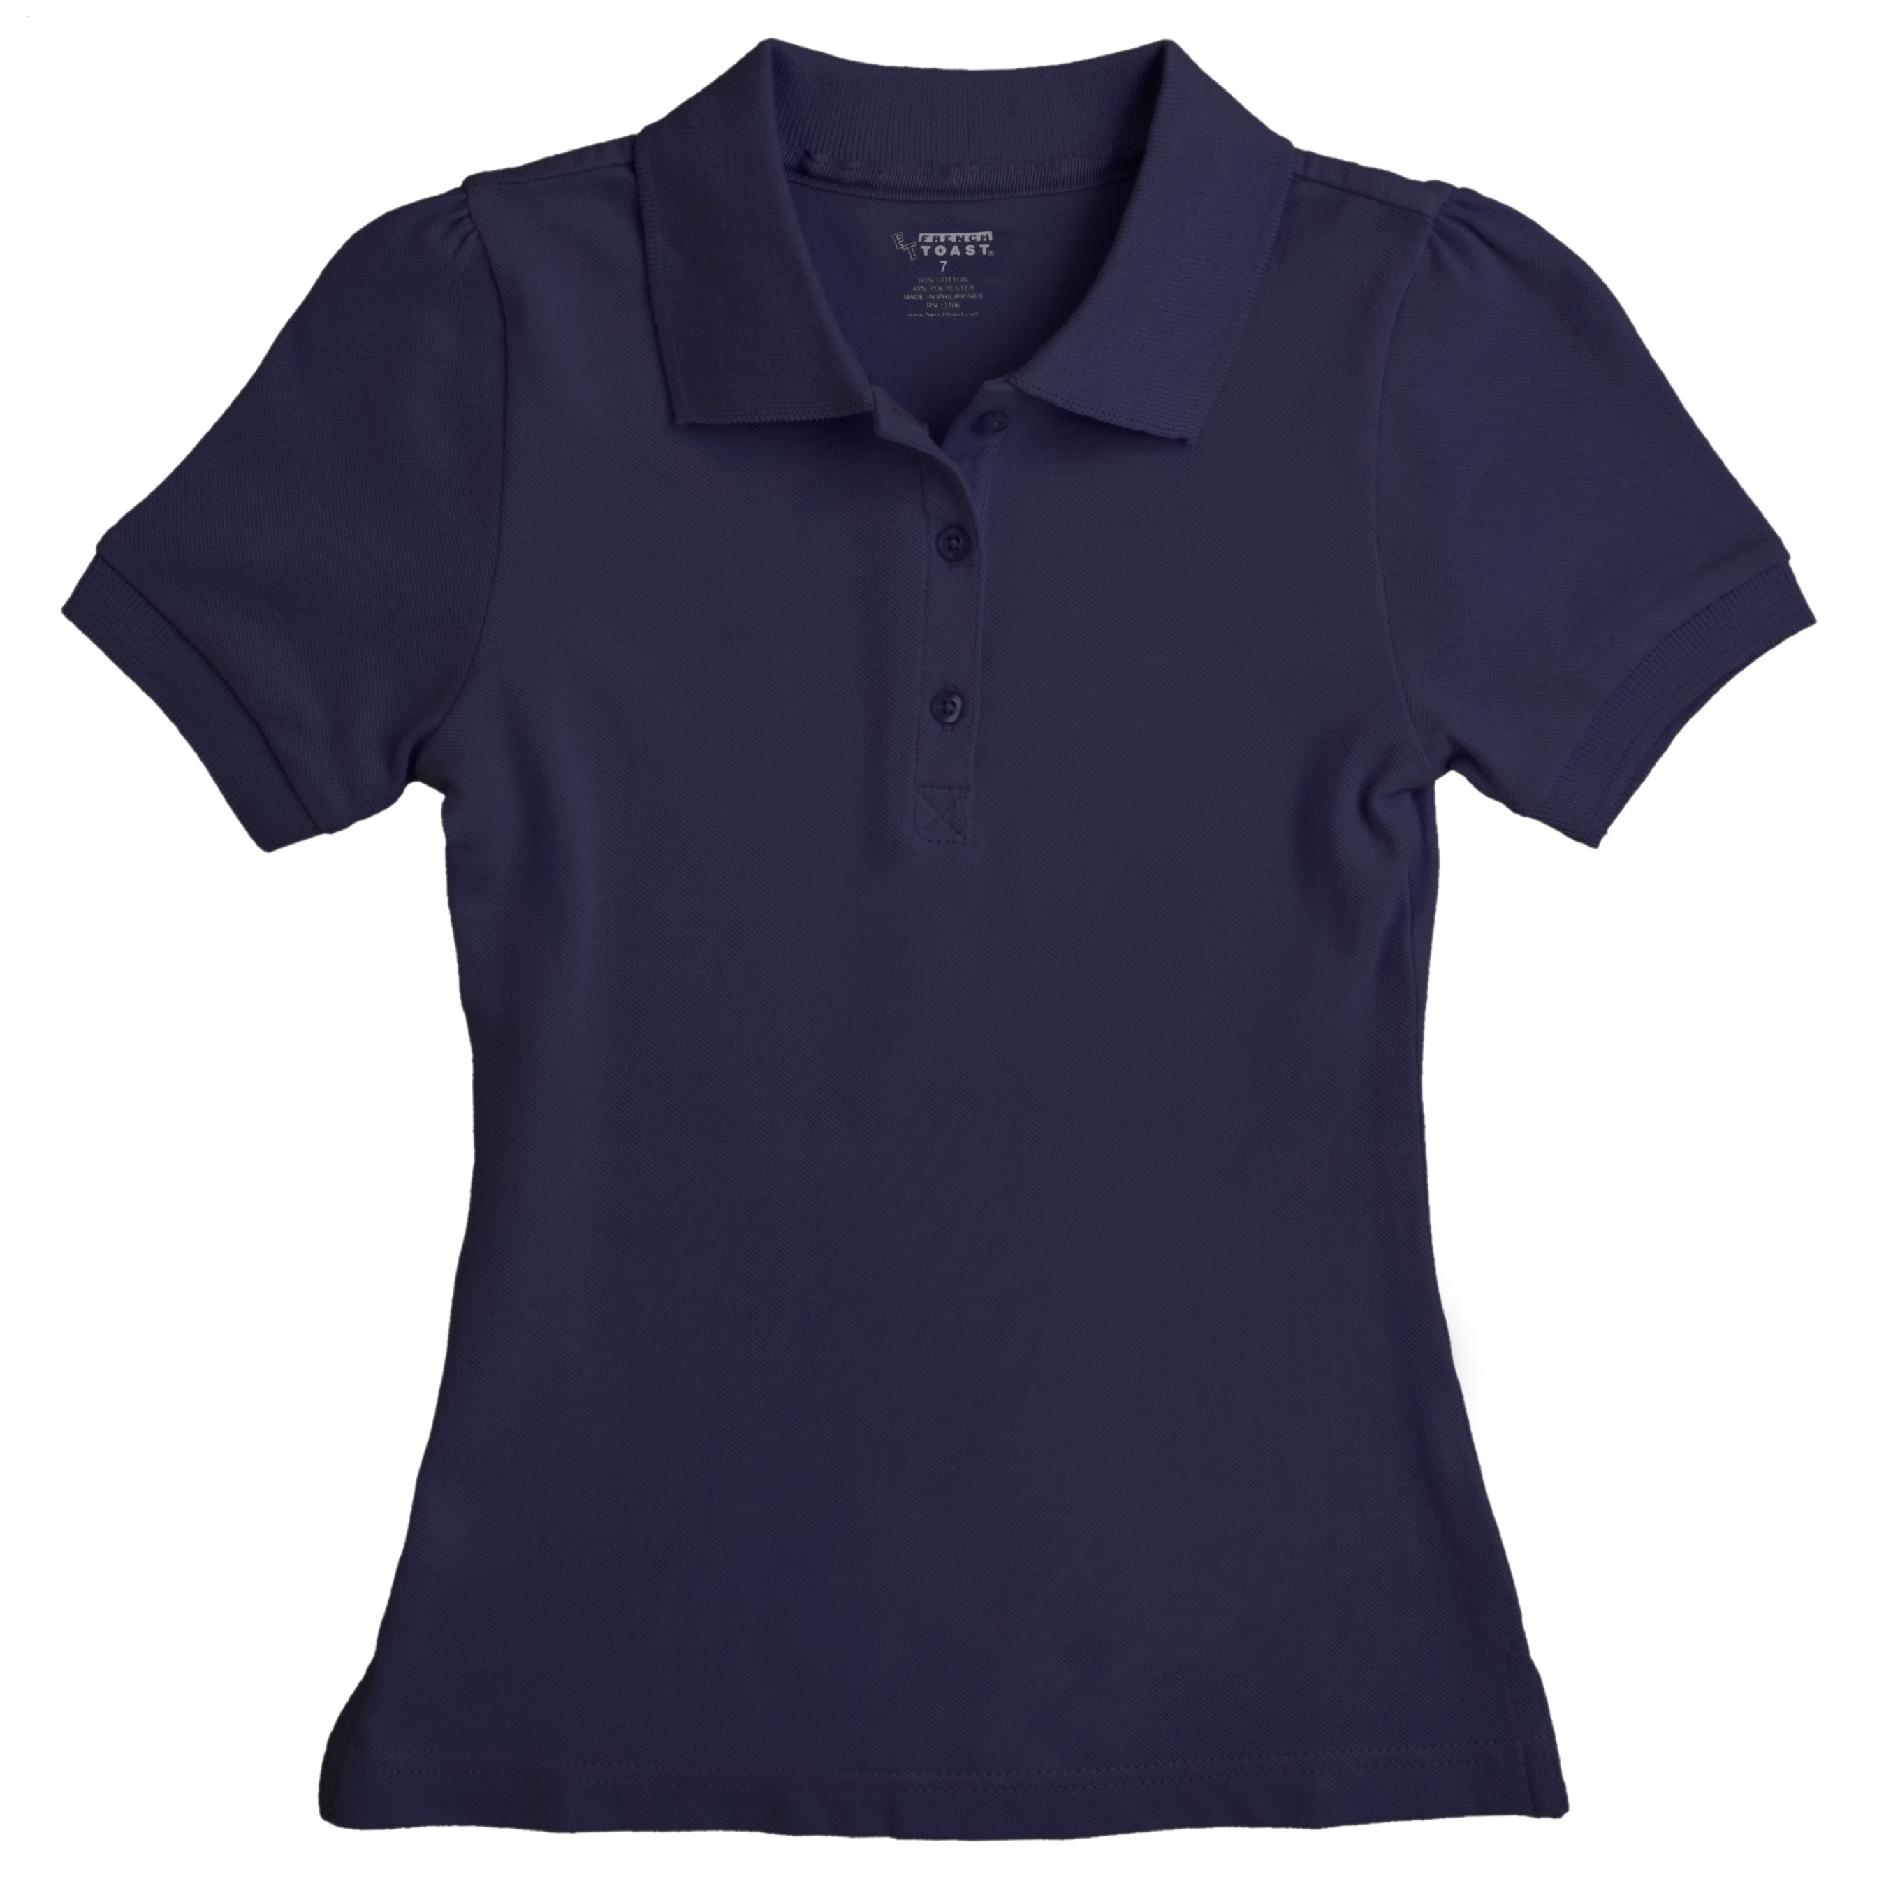 At School by French Toast Juniors Short Sleeve Stretch Pique Polo